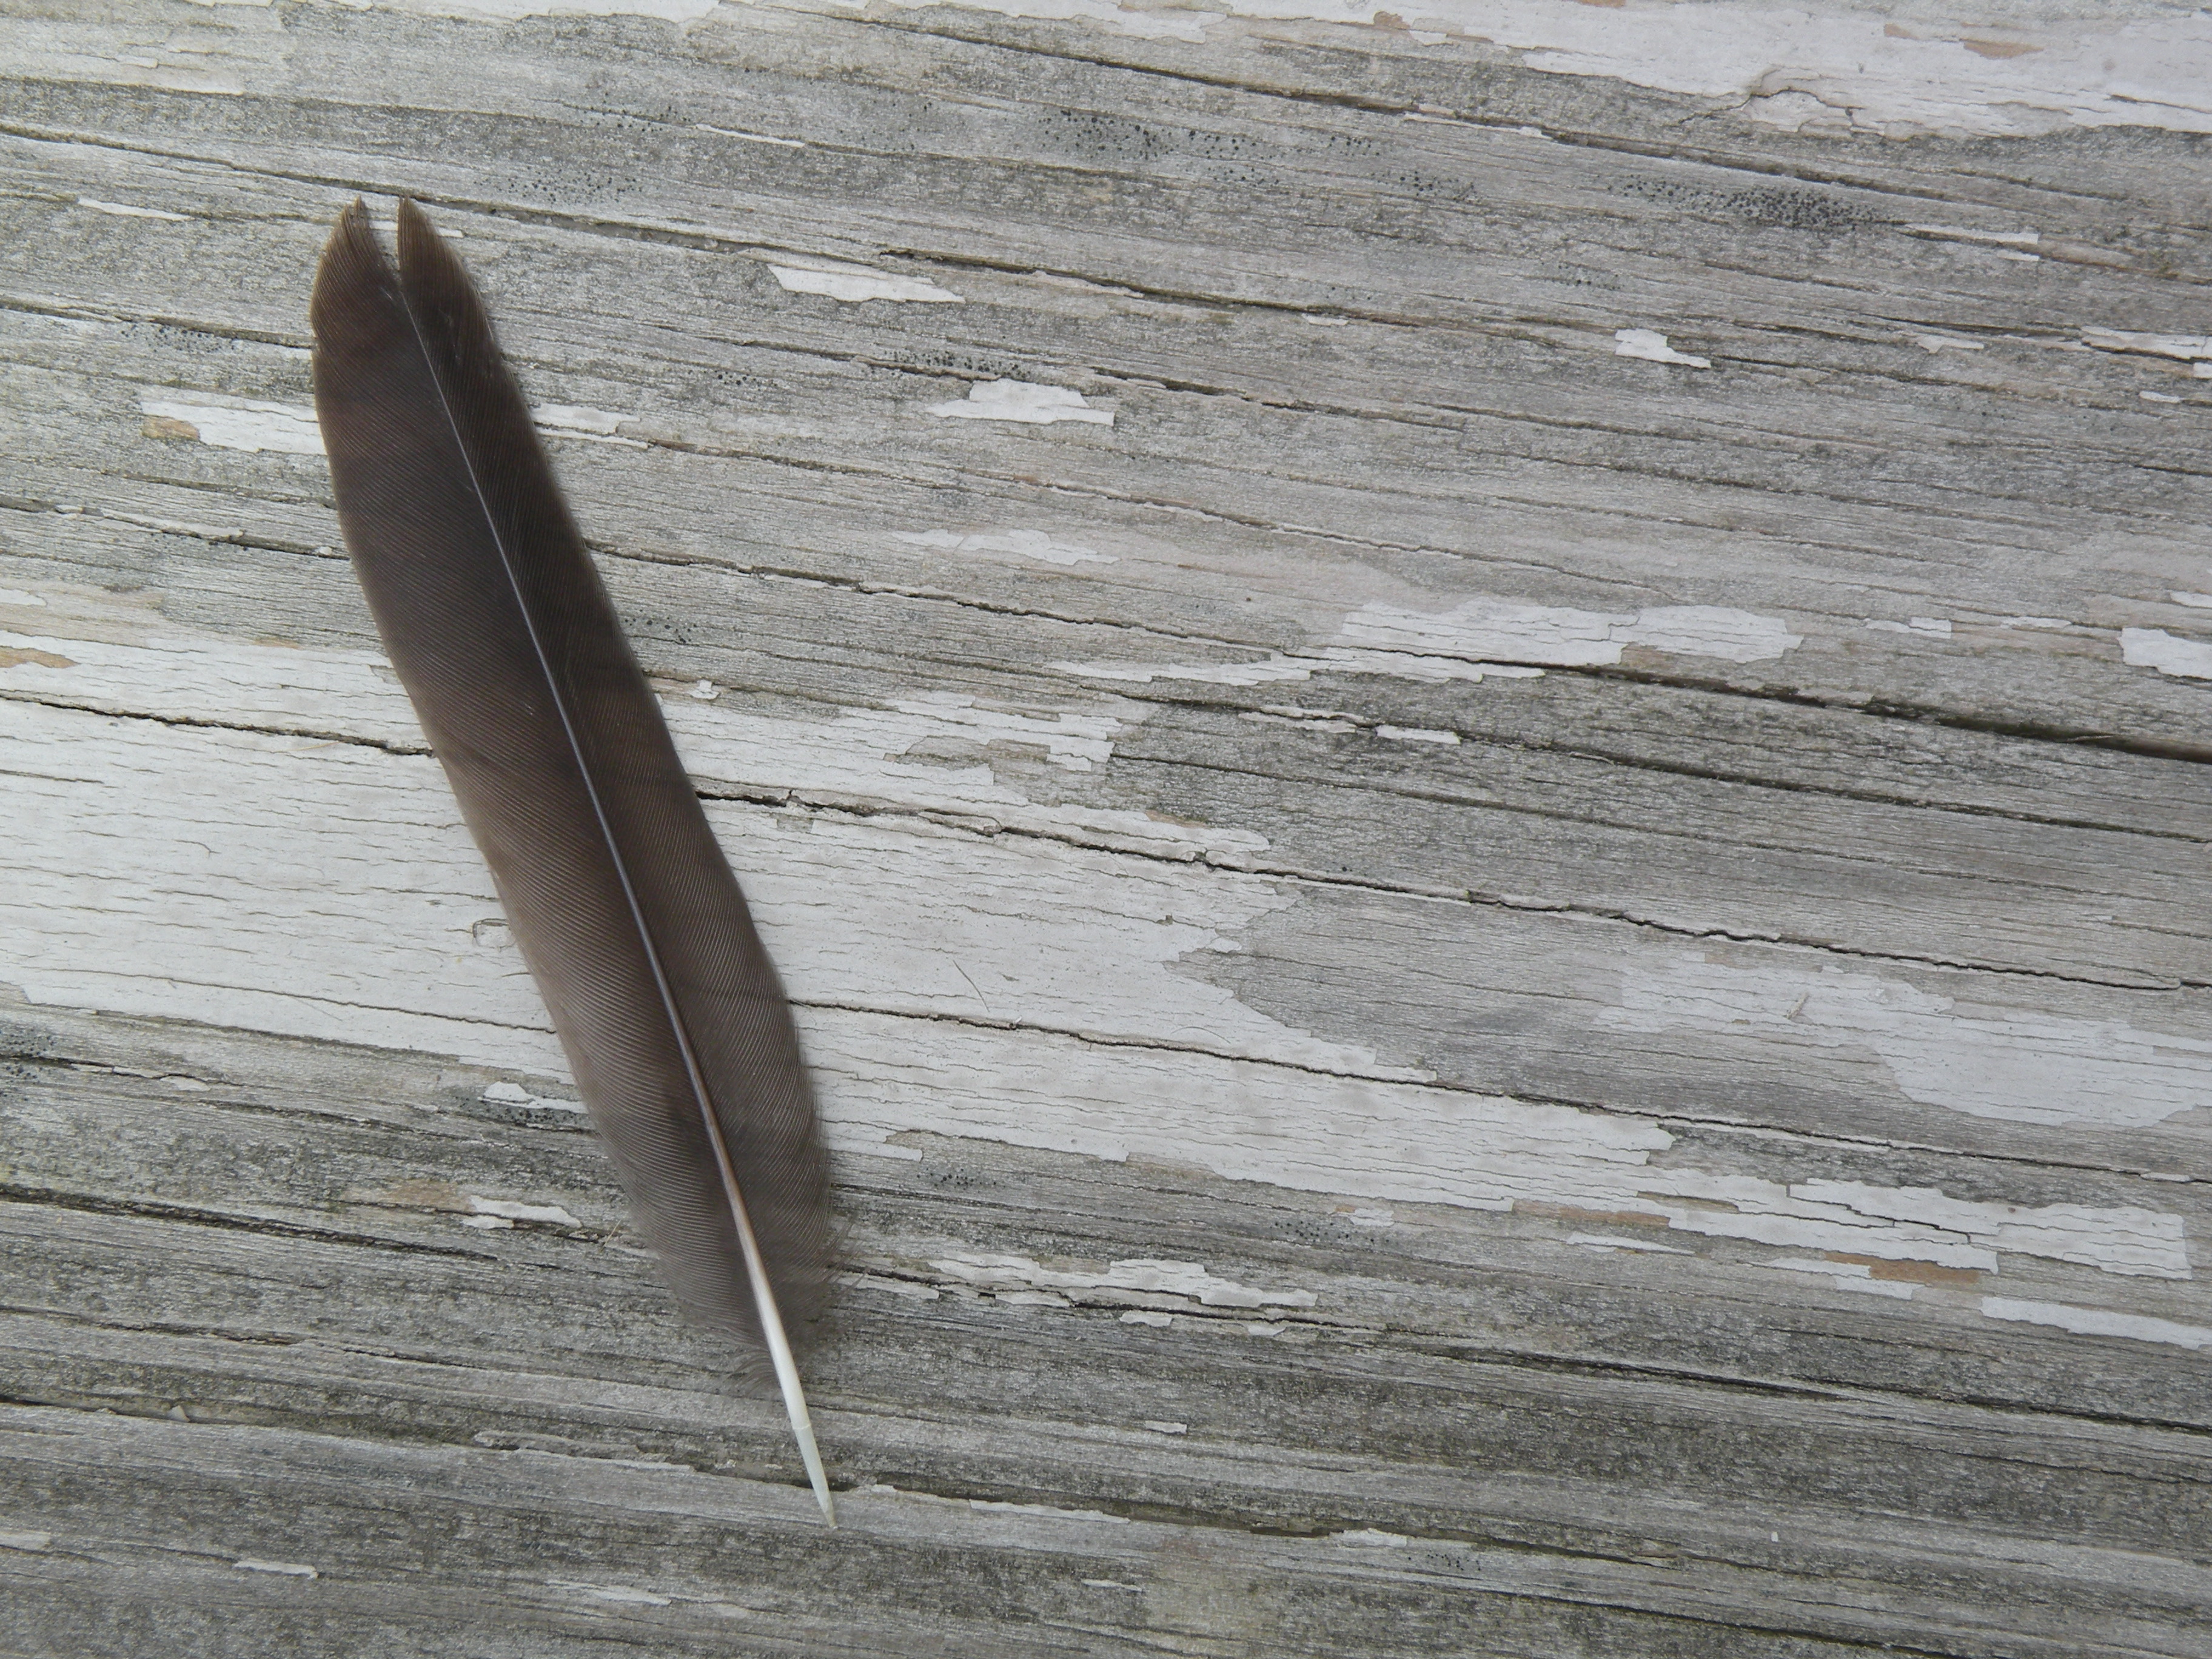 Feather and wood photo